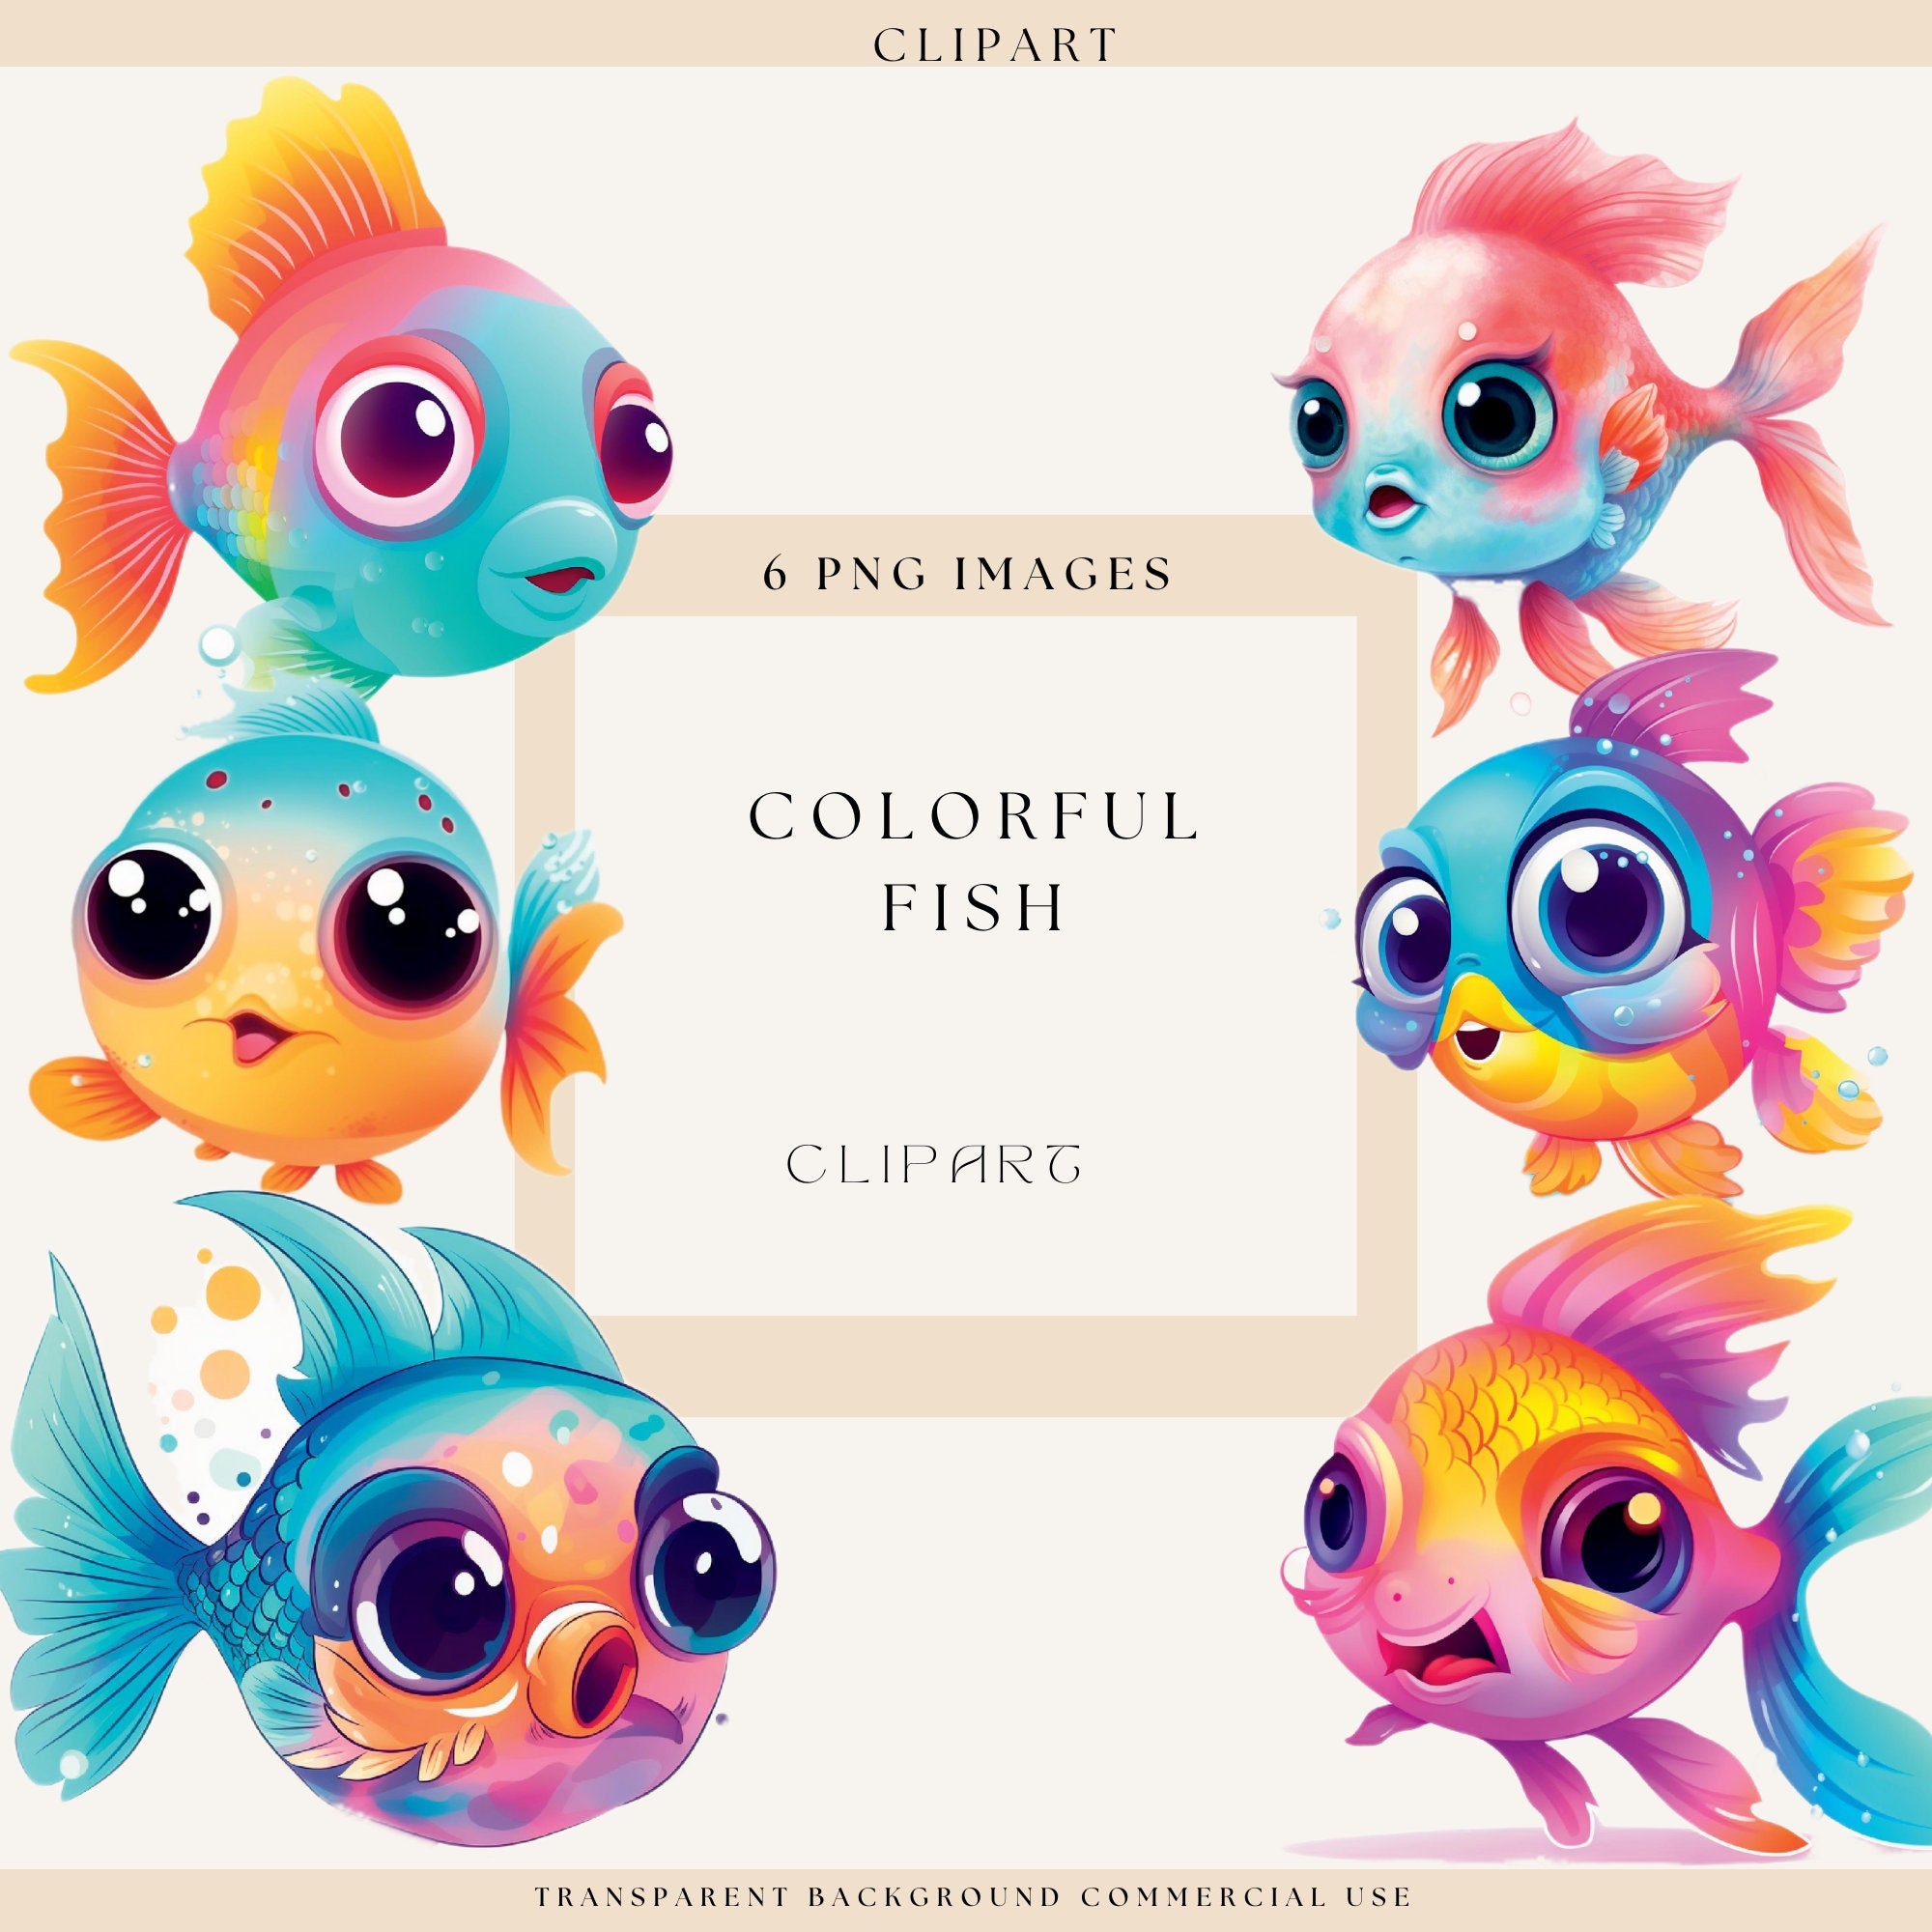 Adorable Colorful Fish Clip Art Collection 6 Graphic Designs for